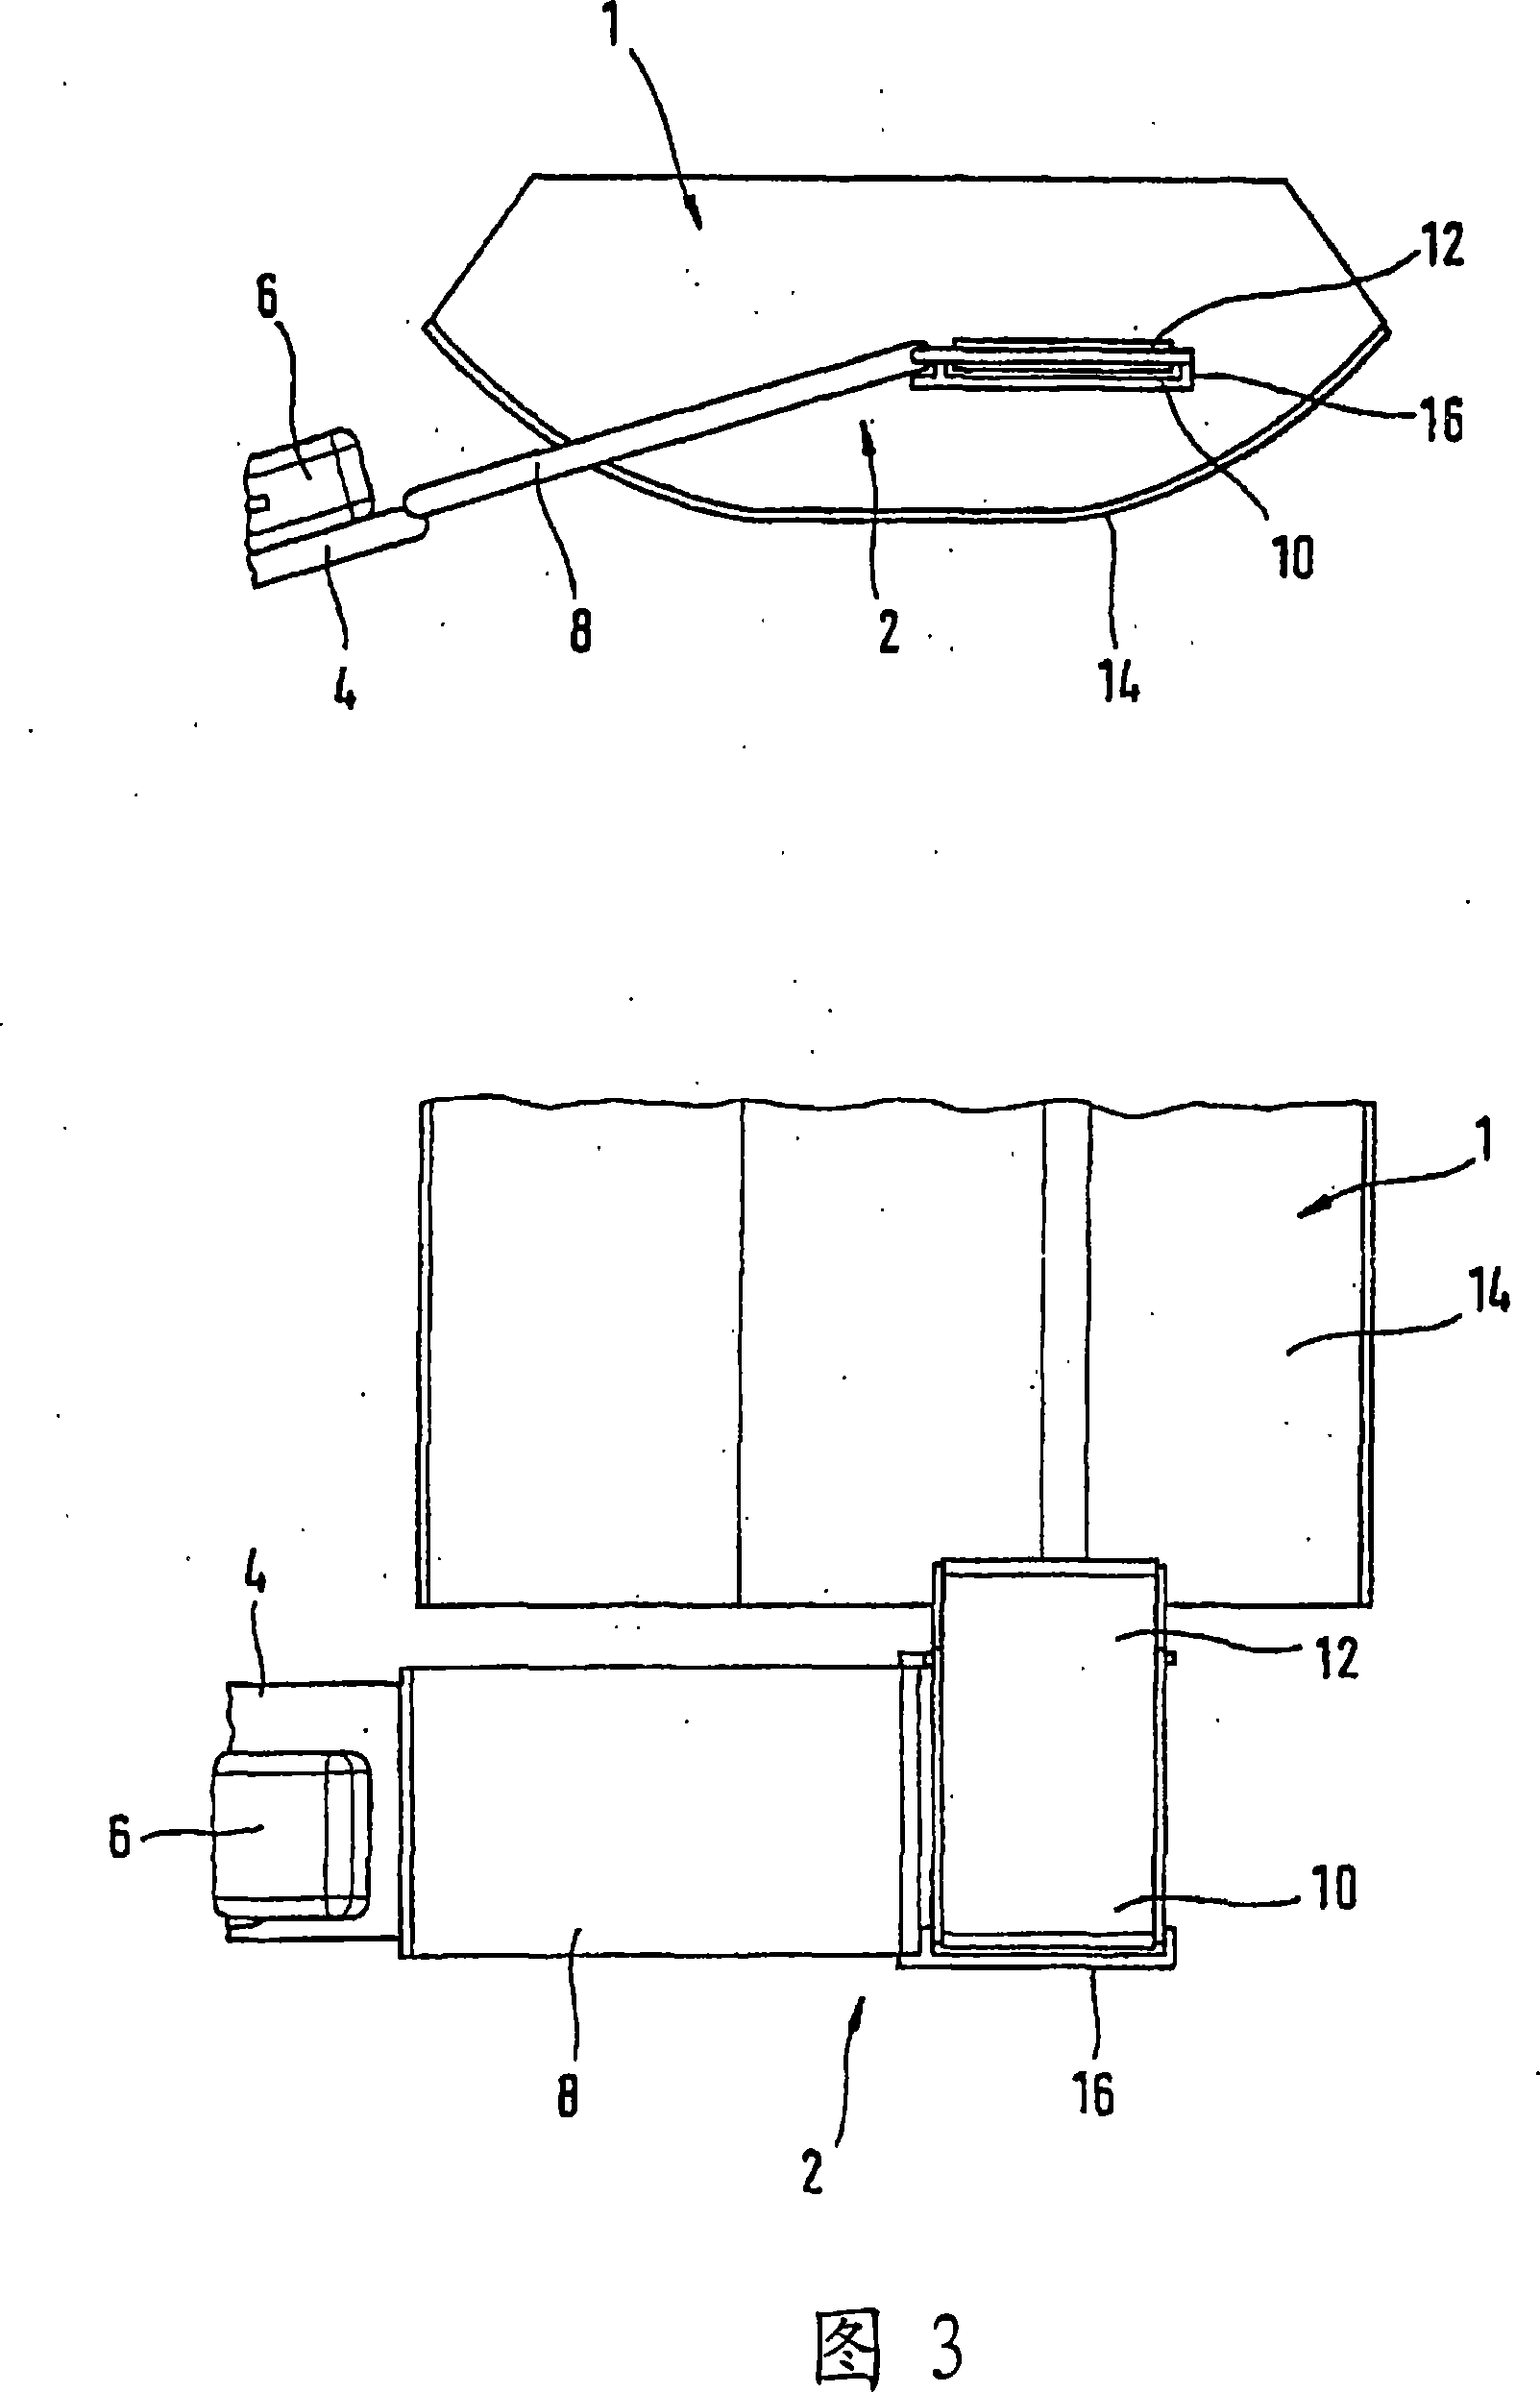 System for loading and unloading unpakced cargo and intermediate transport device or unit